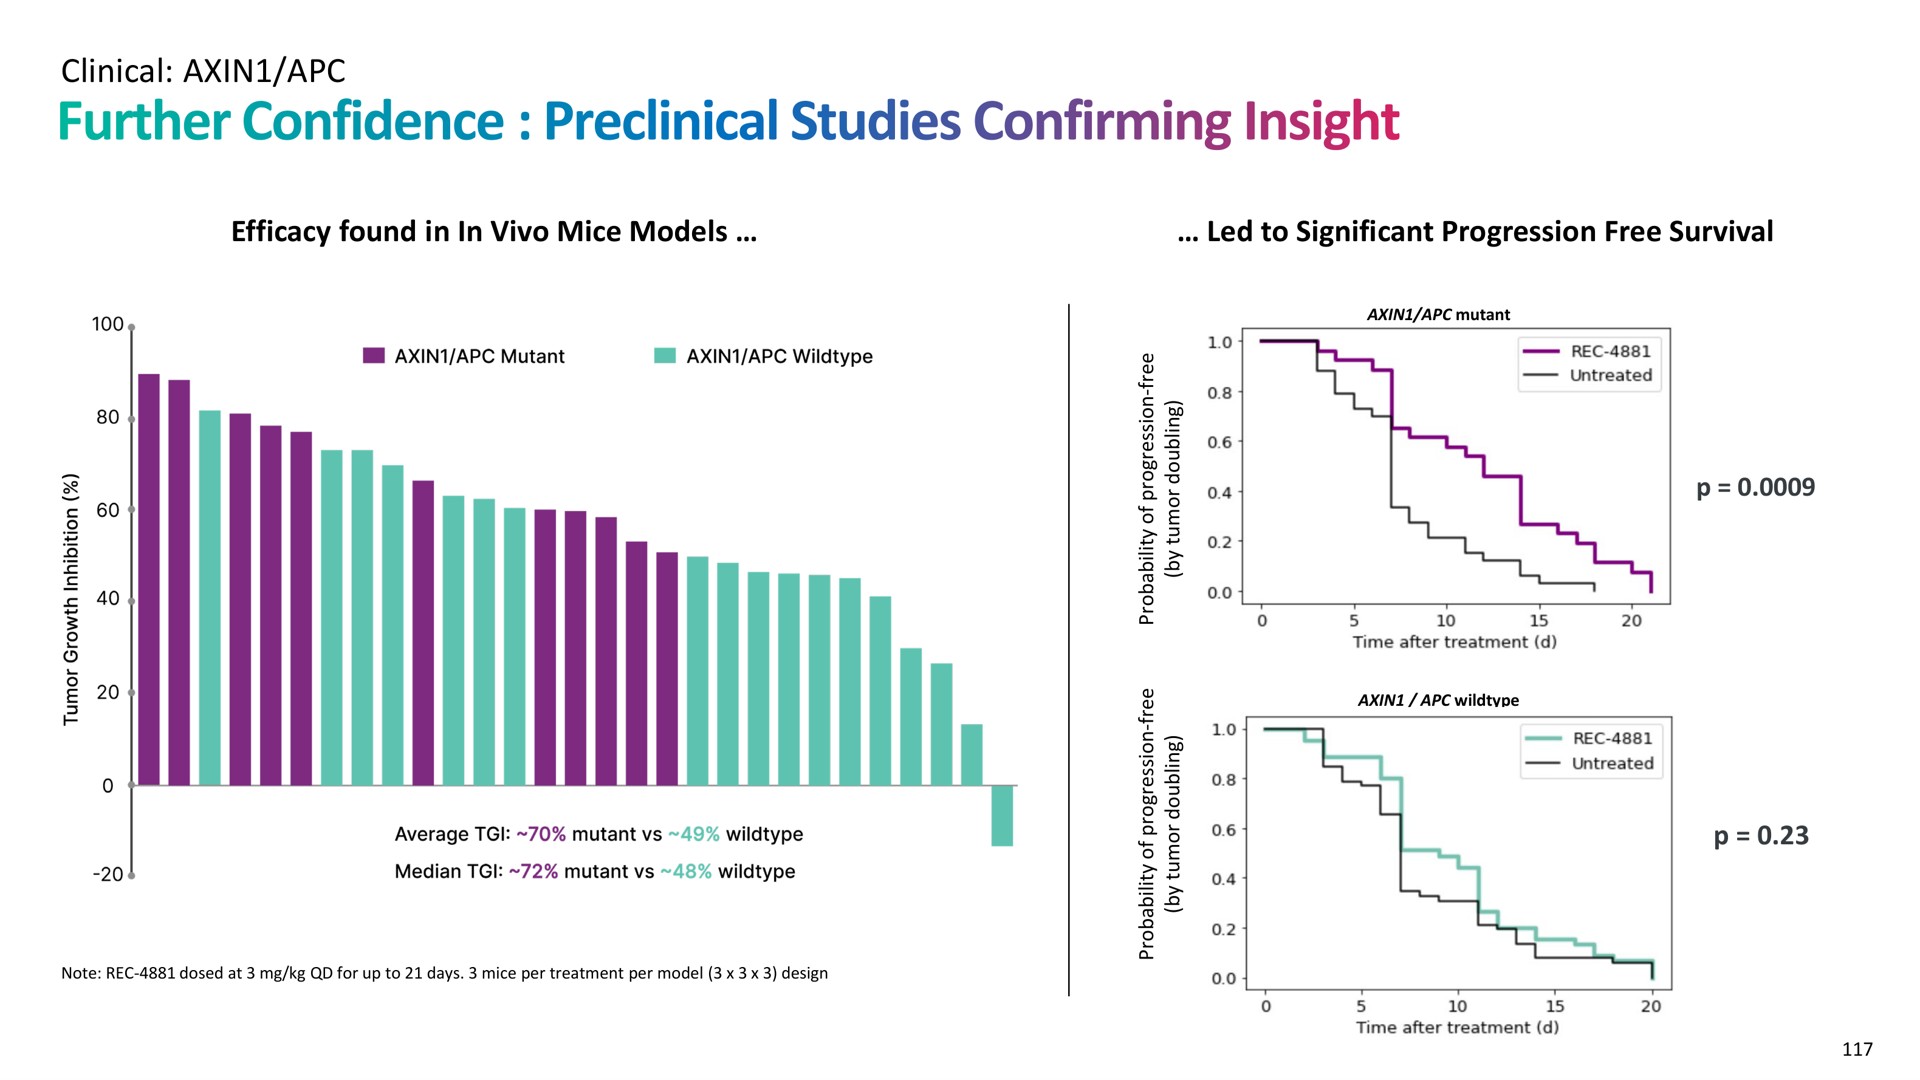 clinical efficacy found in in mice models led to significant progression free survival further confidence preclinical studies confirming insight | Recursion Pharmaceuticals